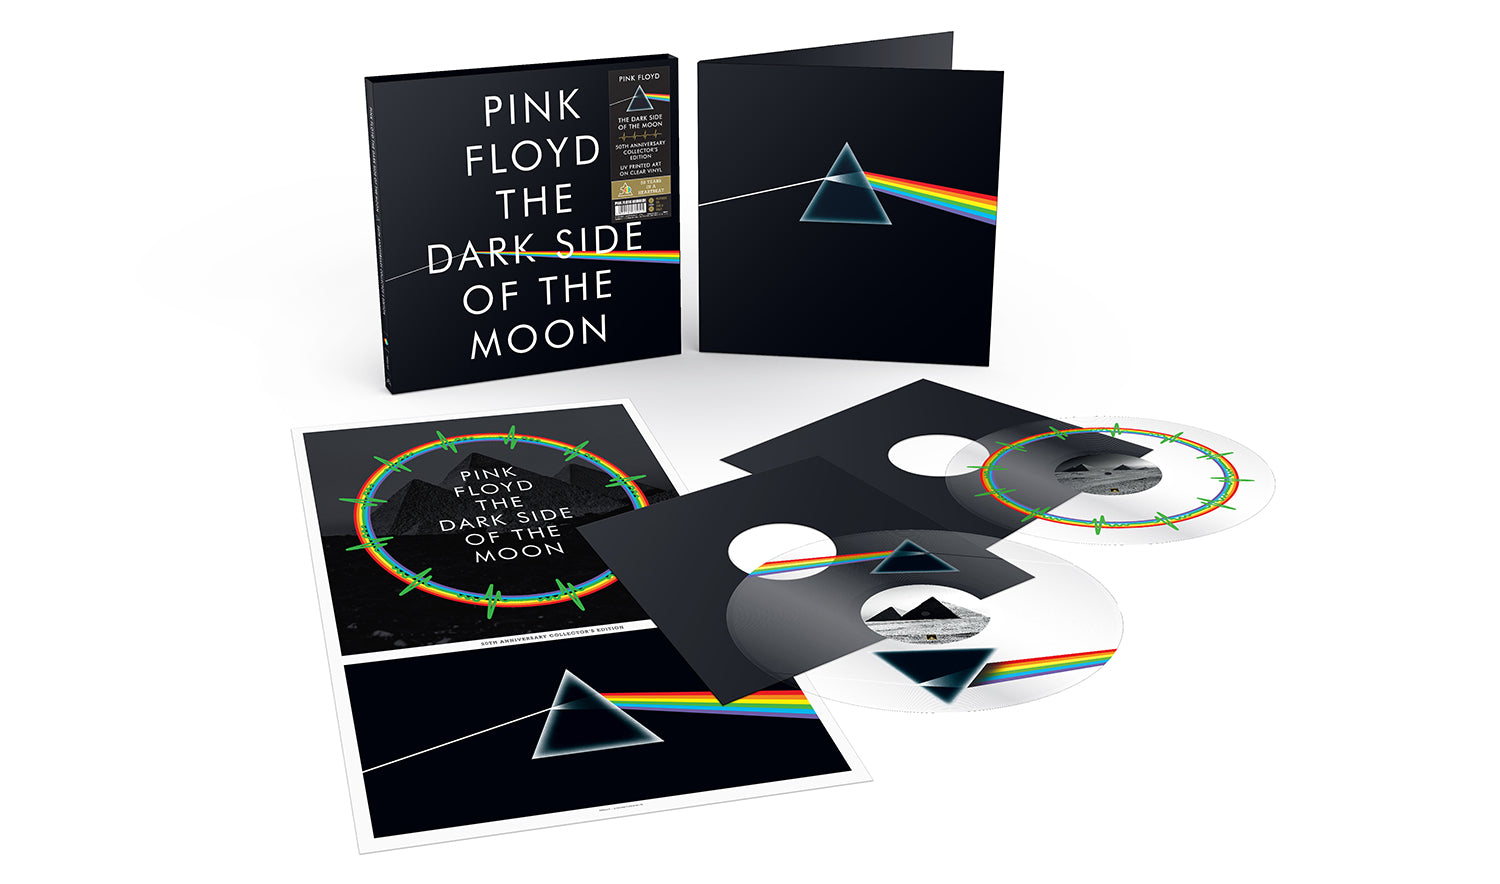 PINK FLOYD - The Dark Side Of The Moon (50th Anniversary Collector's Edition) - 2LP - 180g Crystal Clear Vinyl with UV Printed Artwork [APR 19]